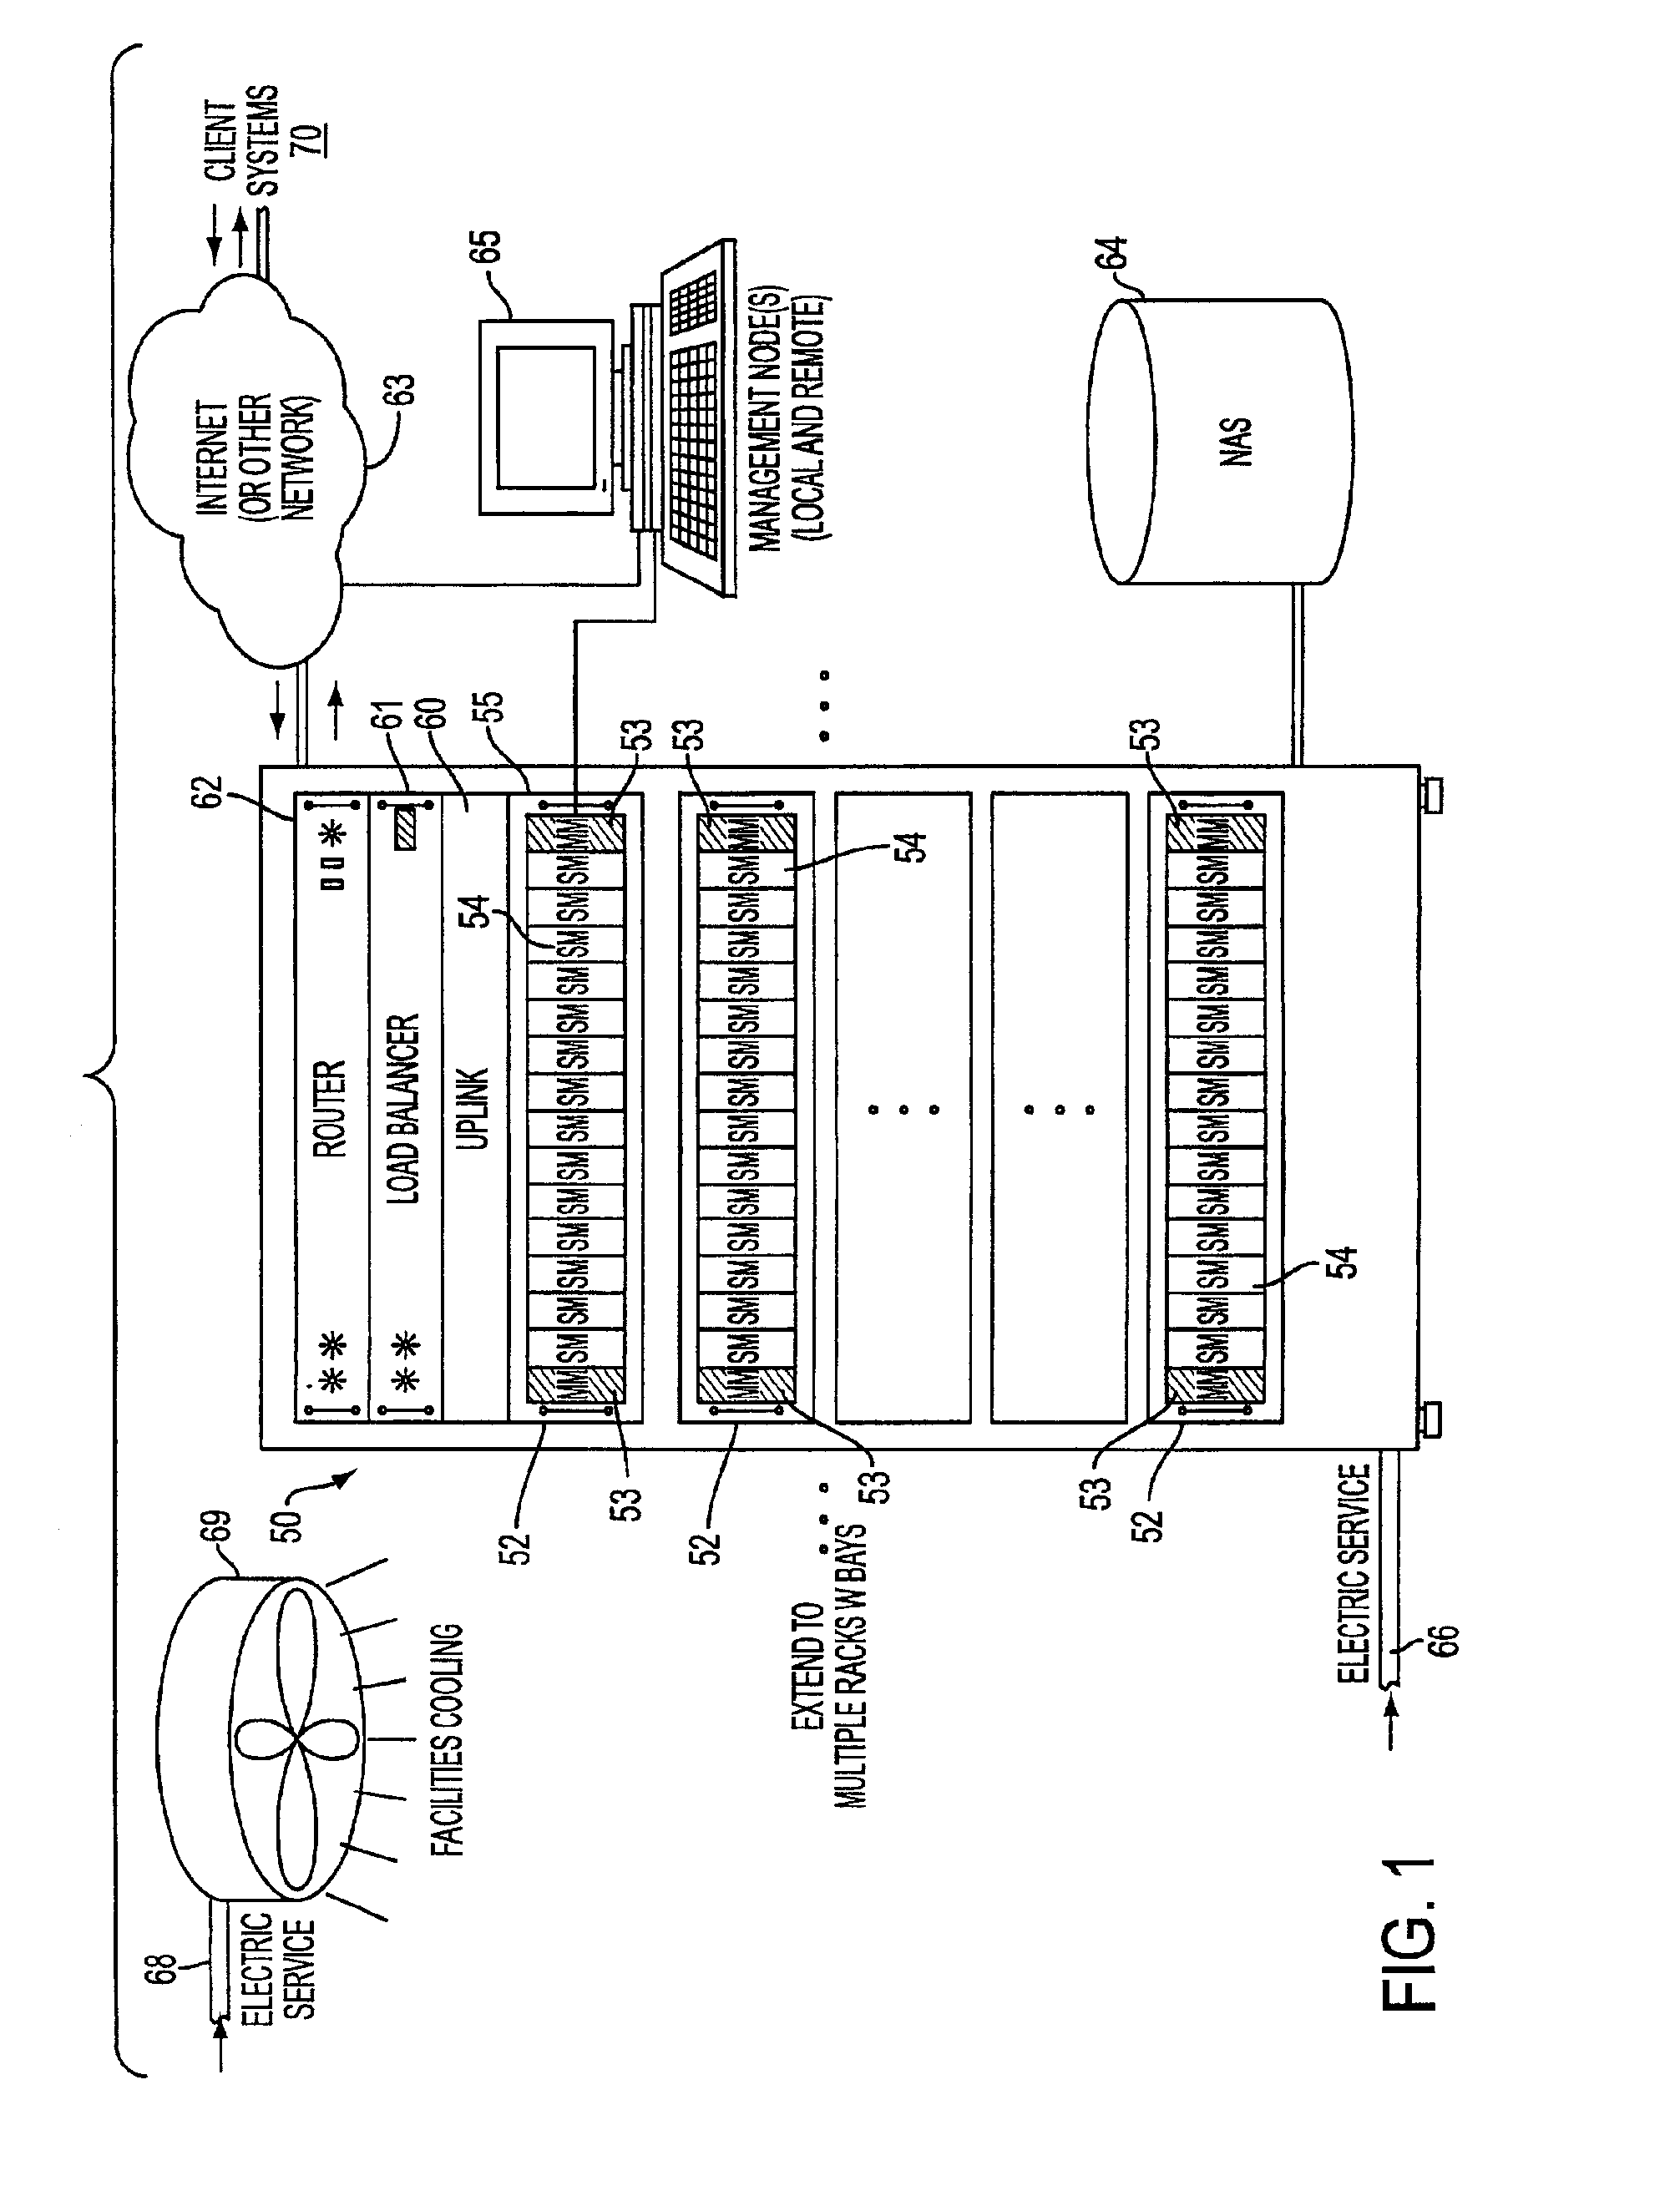 System, method, and architecture for dynamic server power management and dynamic workload management for multi-server environment